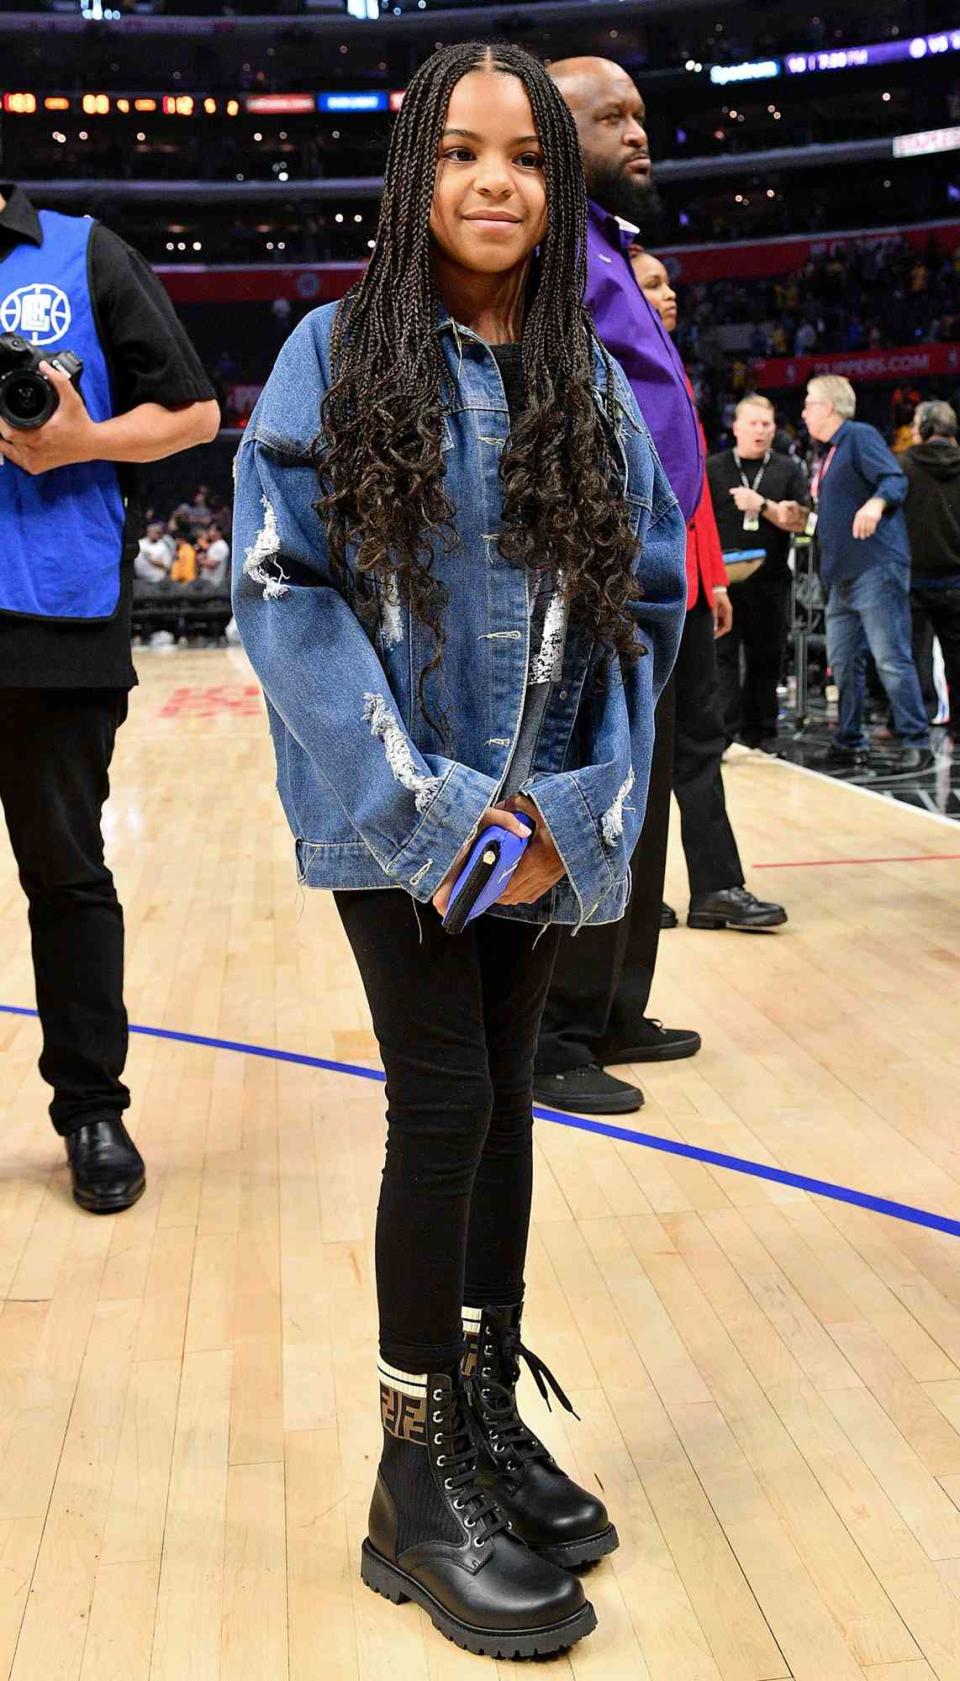 Blue Ivy Carter attends a basketball game between the Los Angeles Clippers and the Los Angeles Lakers at Staples Center on March 08, 2020 in Los Angeles, California